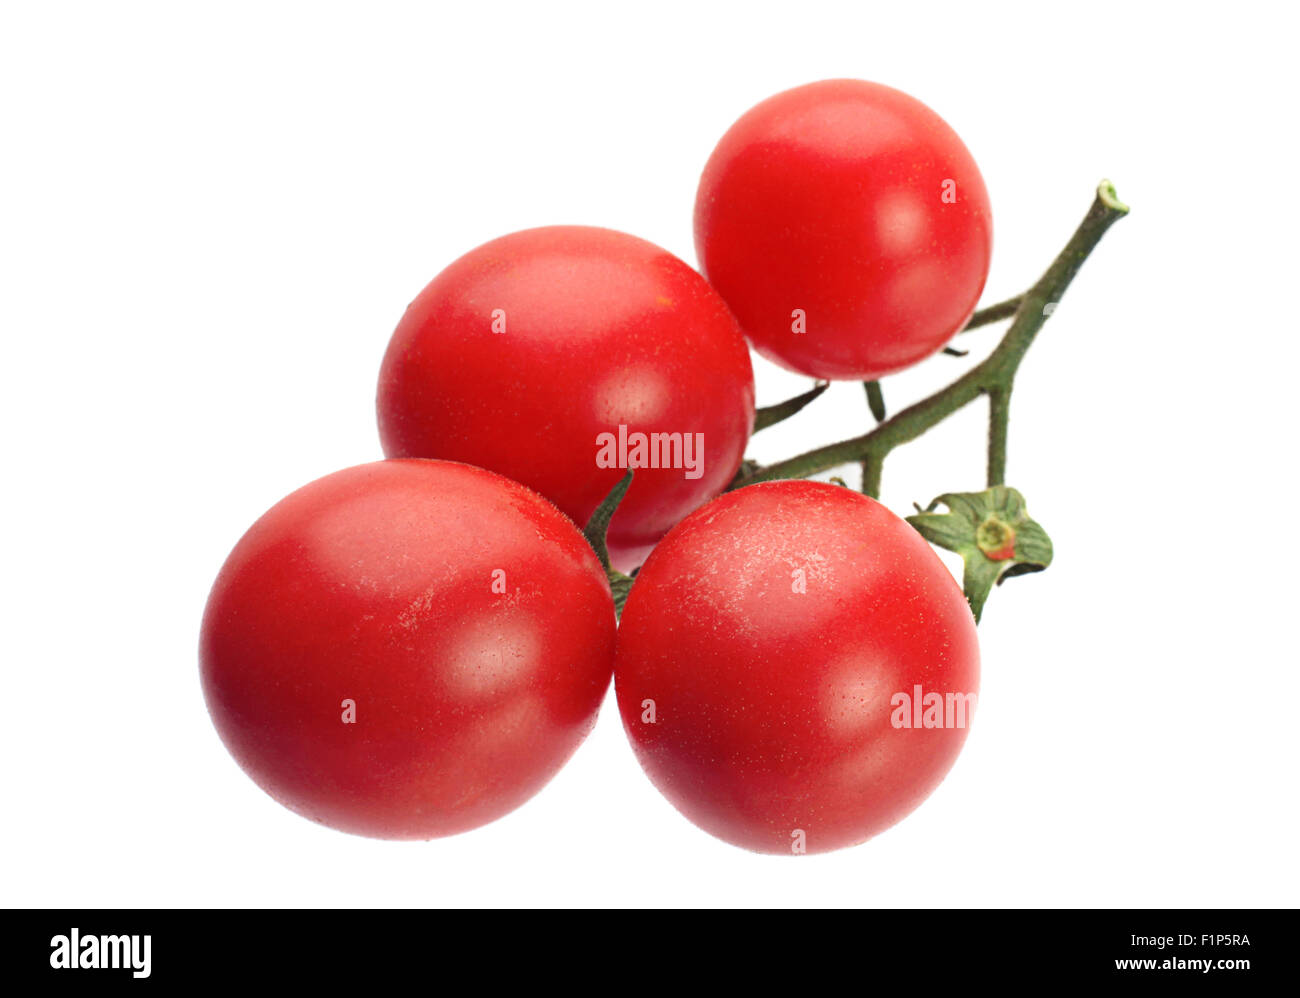 Tomatoes vegetable closeup isolated on white background Stock Photo